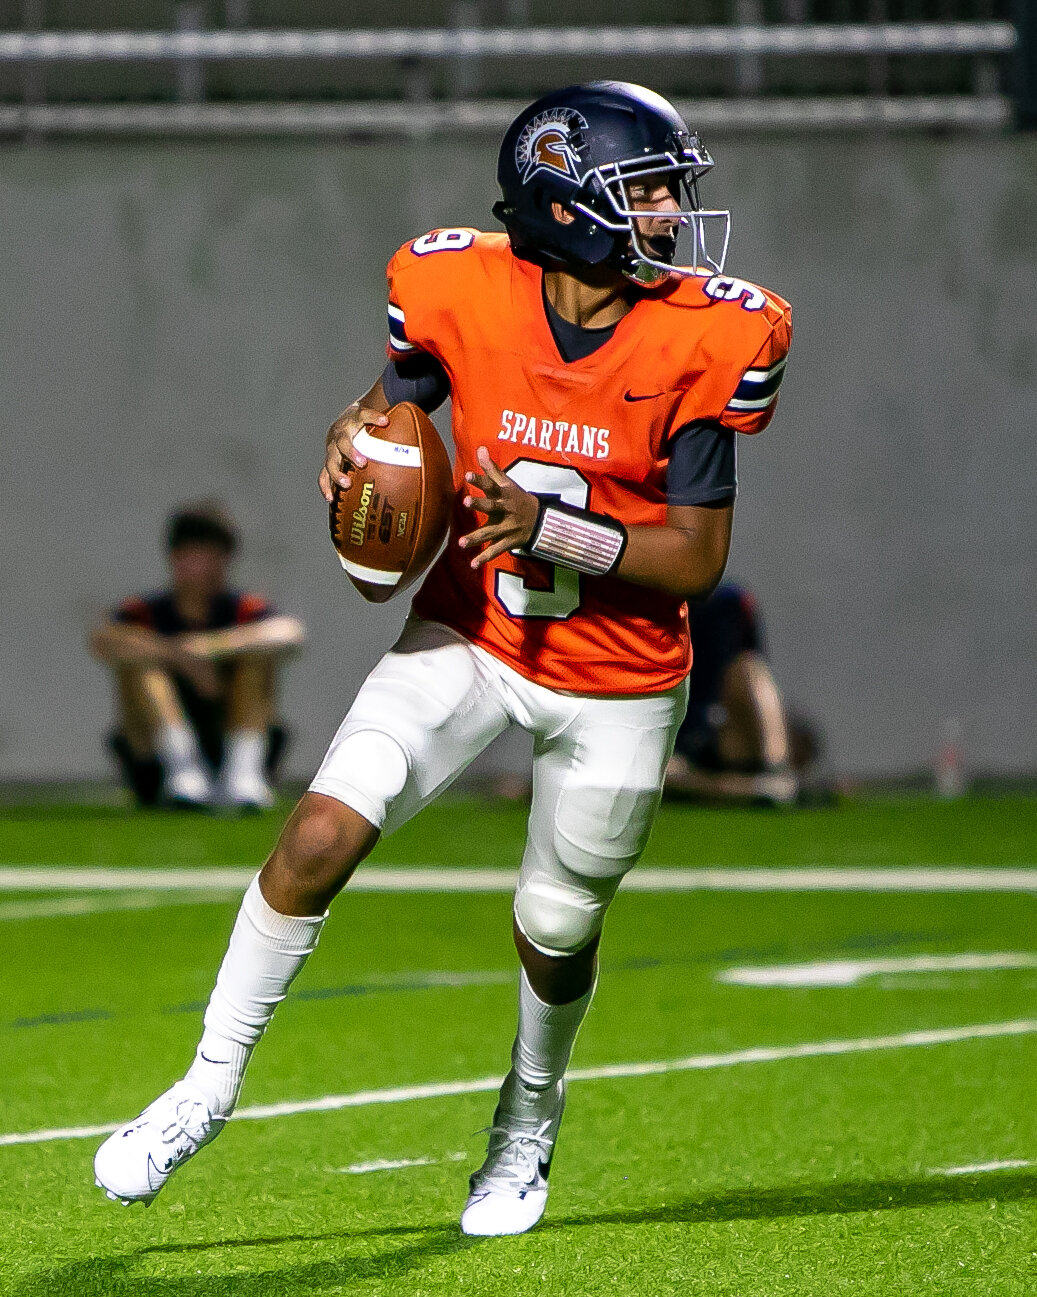 Shaan Patel rolls out from the pocket during Thursday's game between Seven Lakes and Memorial at Legacy Stadium.